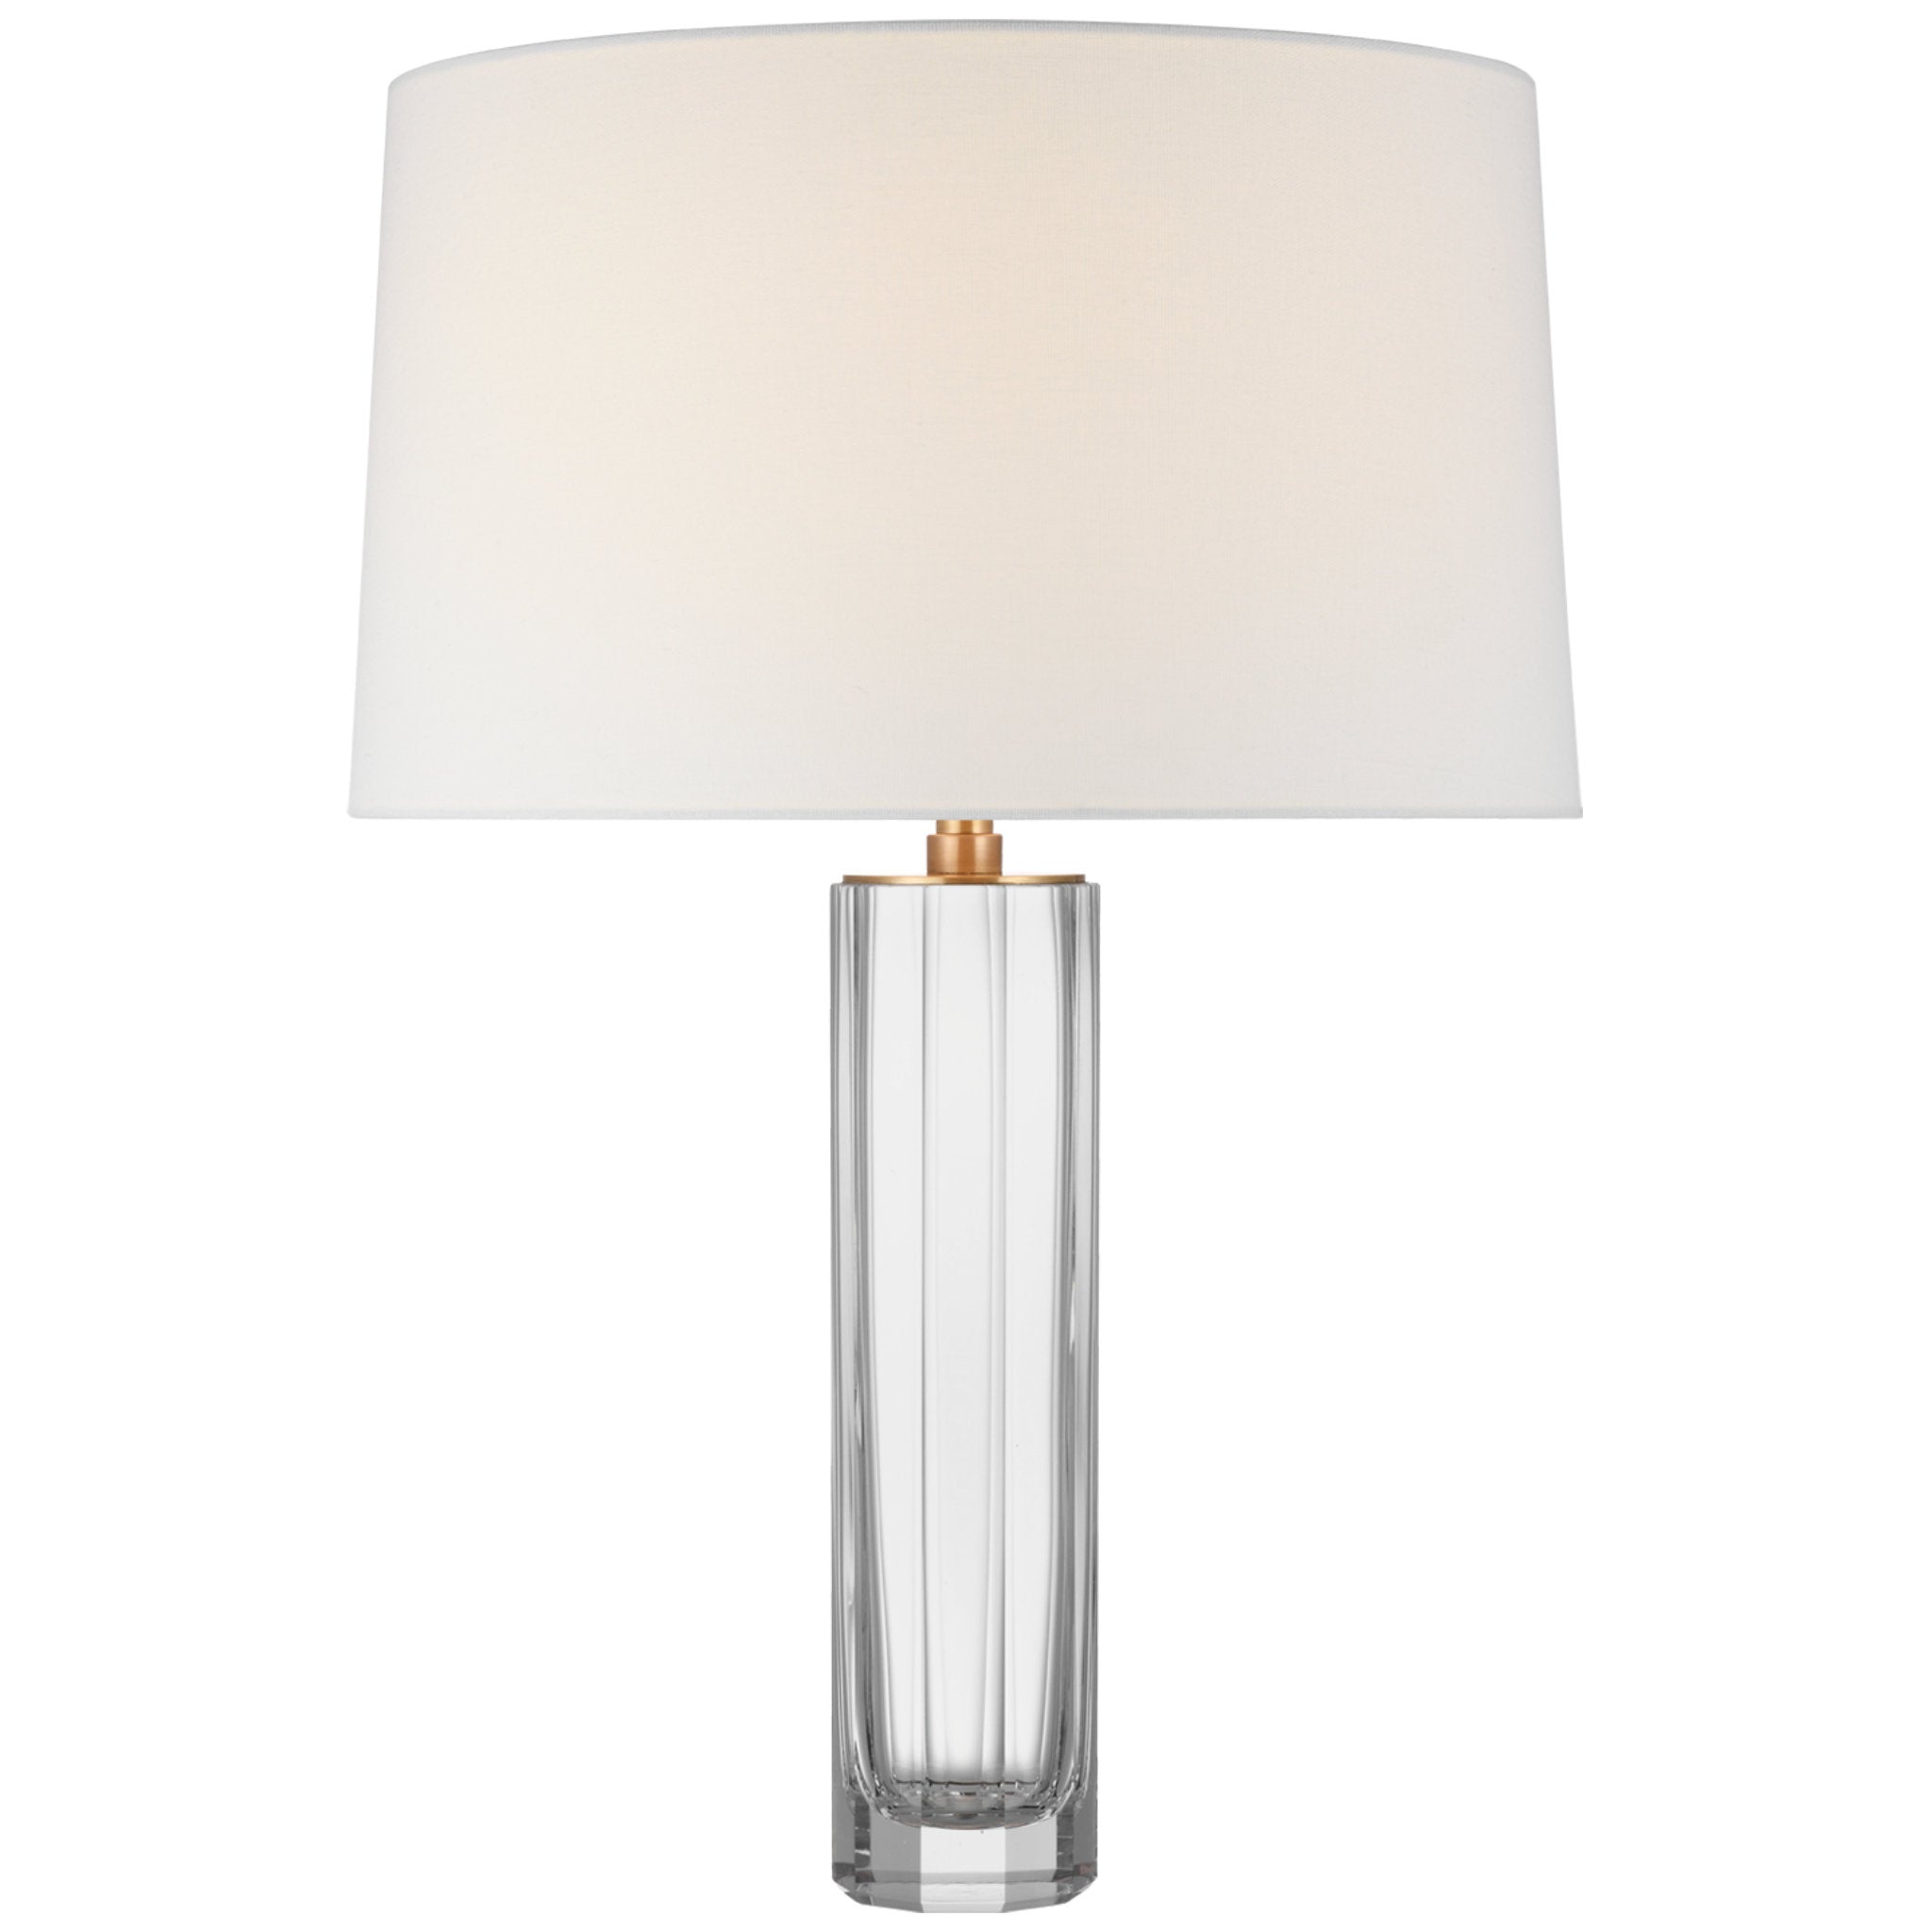 Chapman & Myers Fallon Medium Table Lamp in Clear Glass with Linen Shade